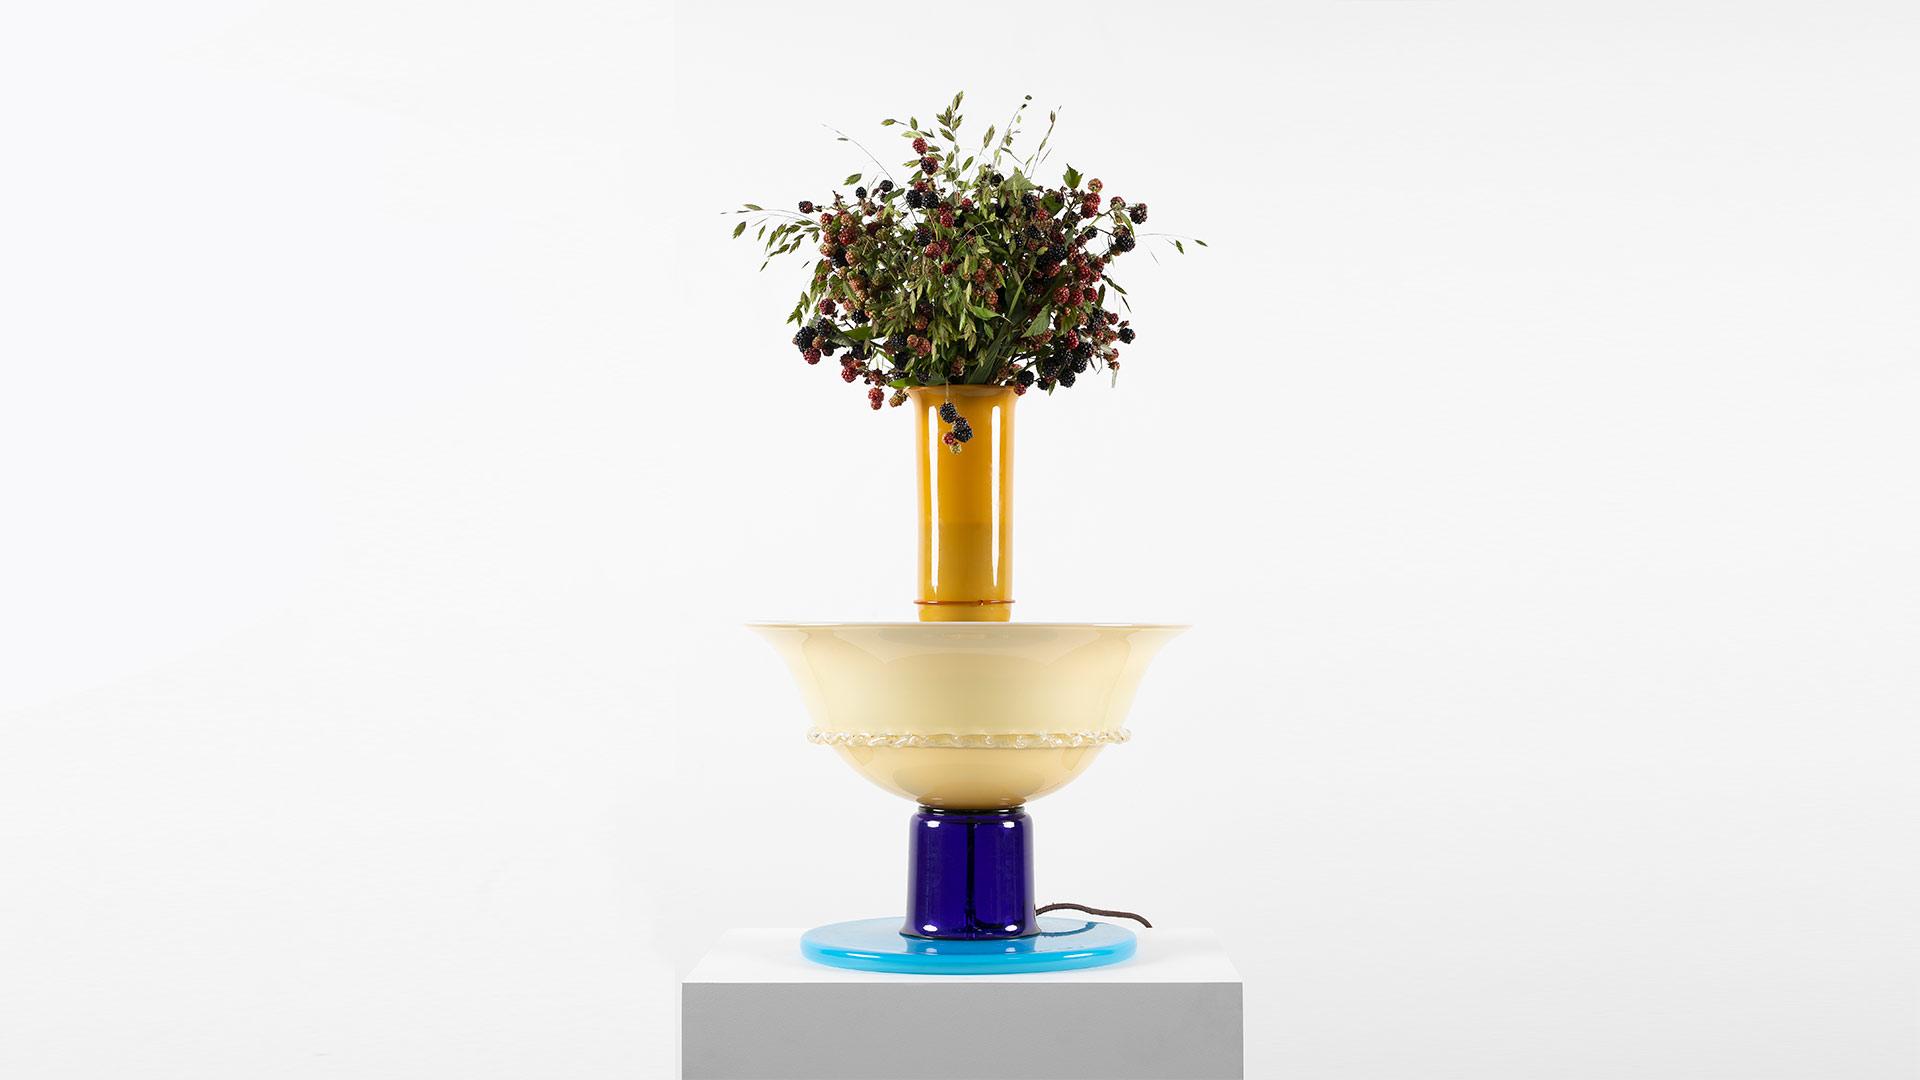 Koenraad Dedobbeleer, “A Living Symbol of the Lurking Failure”, 2022, hand blown glass, brass, mulberry bouquet, 95 x 53 cm, courtesy of the artist and gallery CLEARING © Benjamin Baltus 